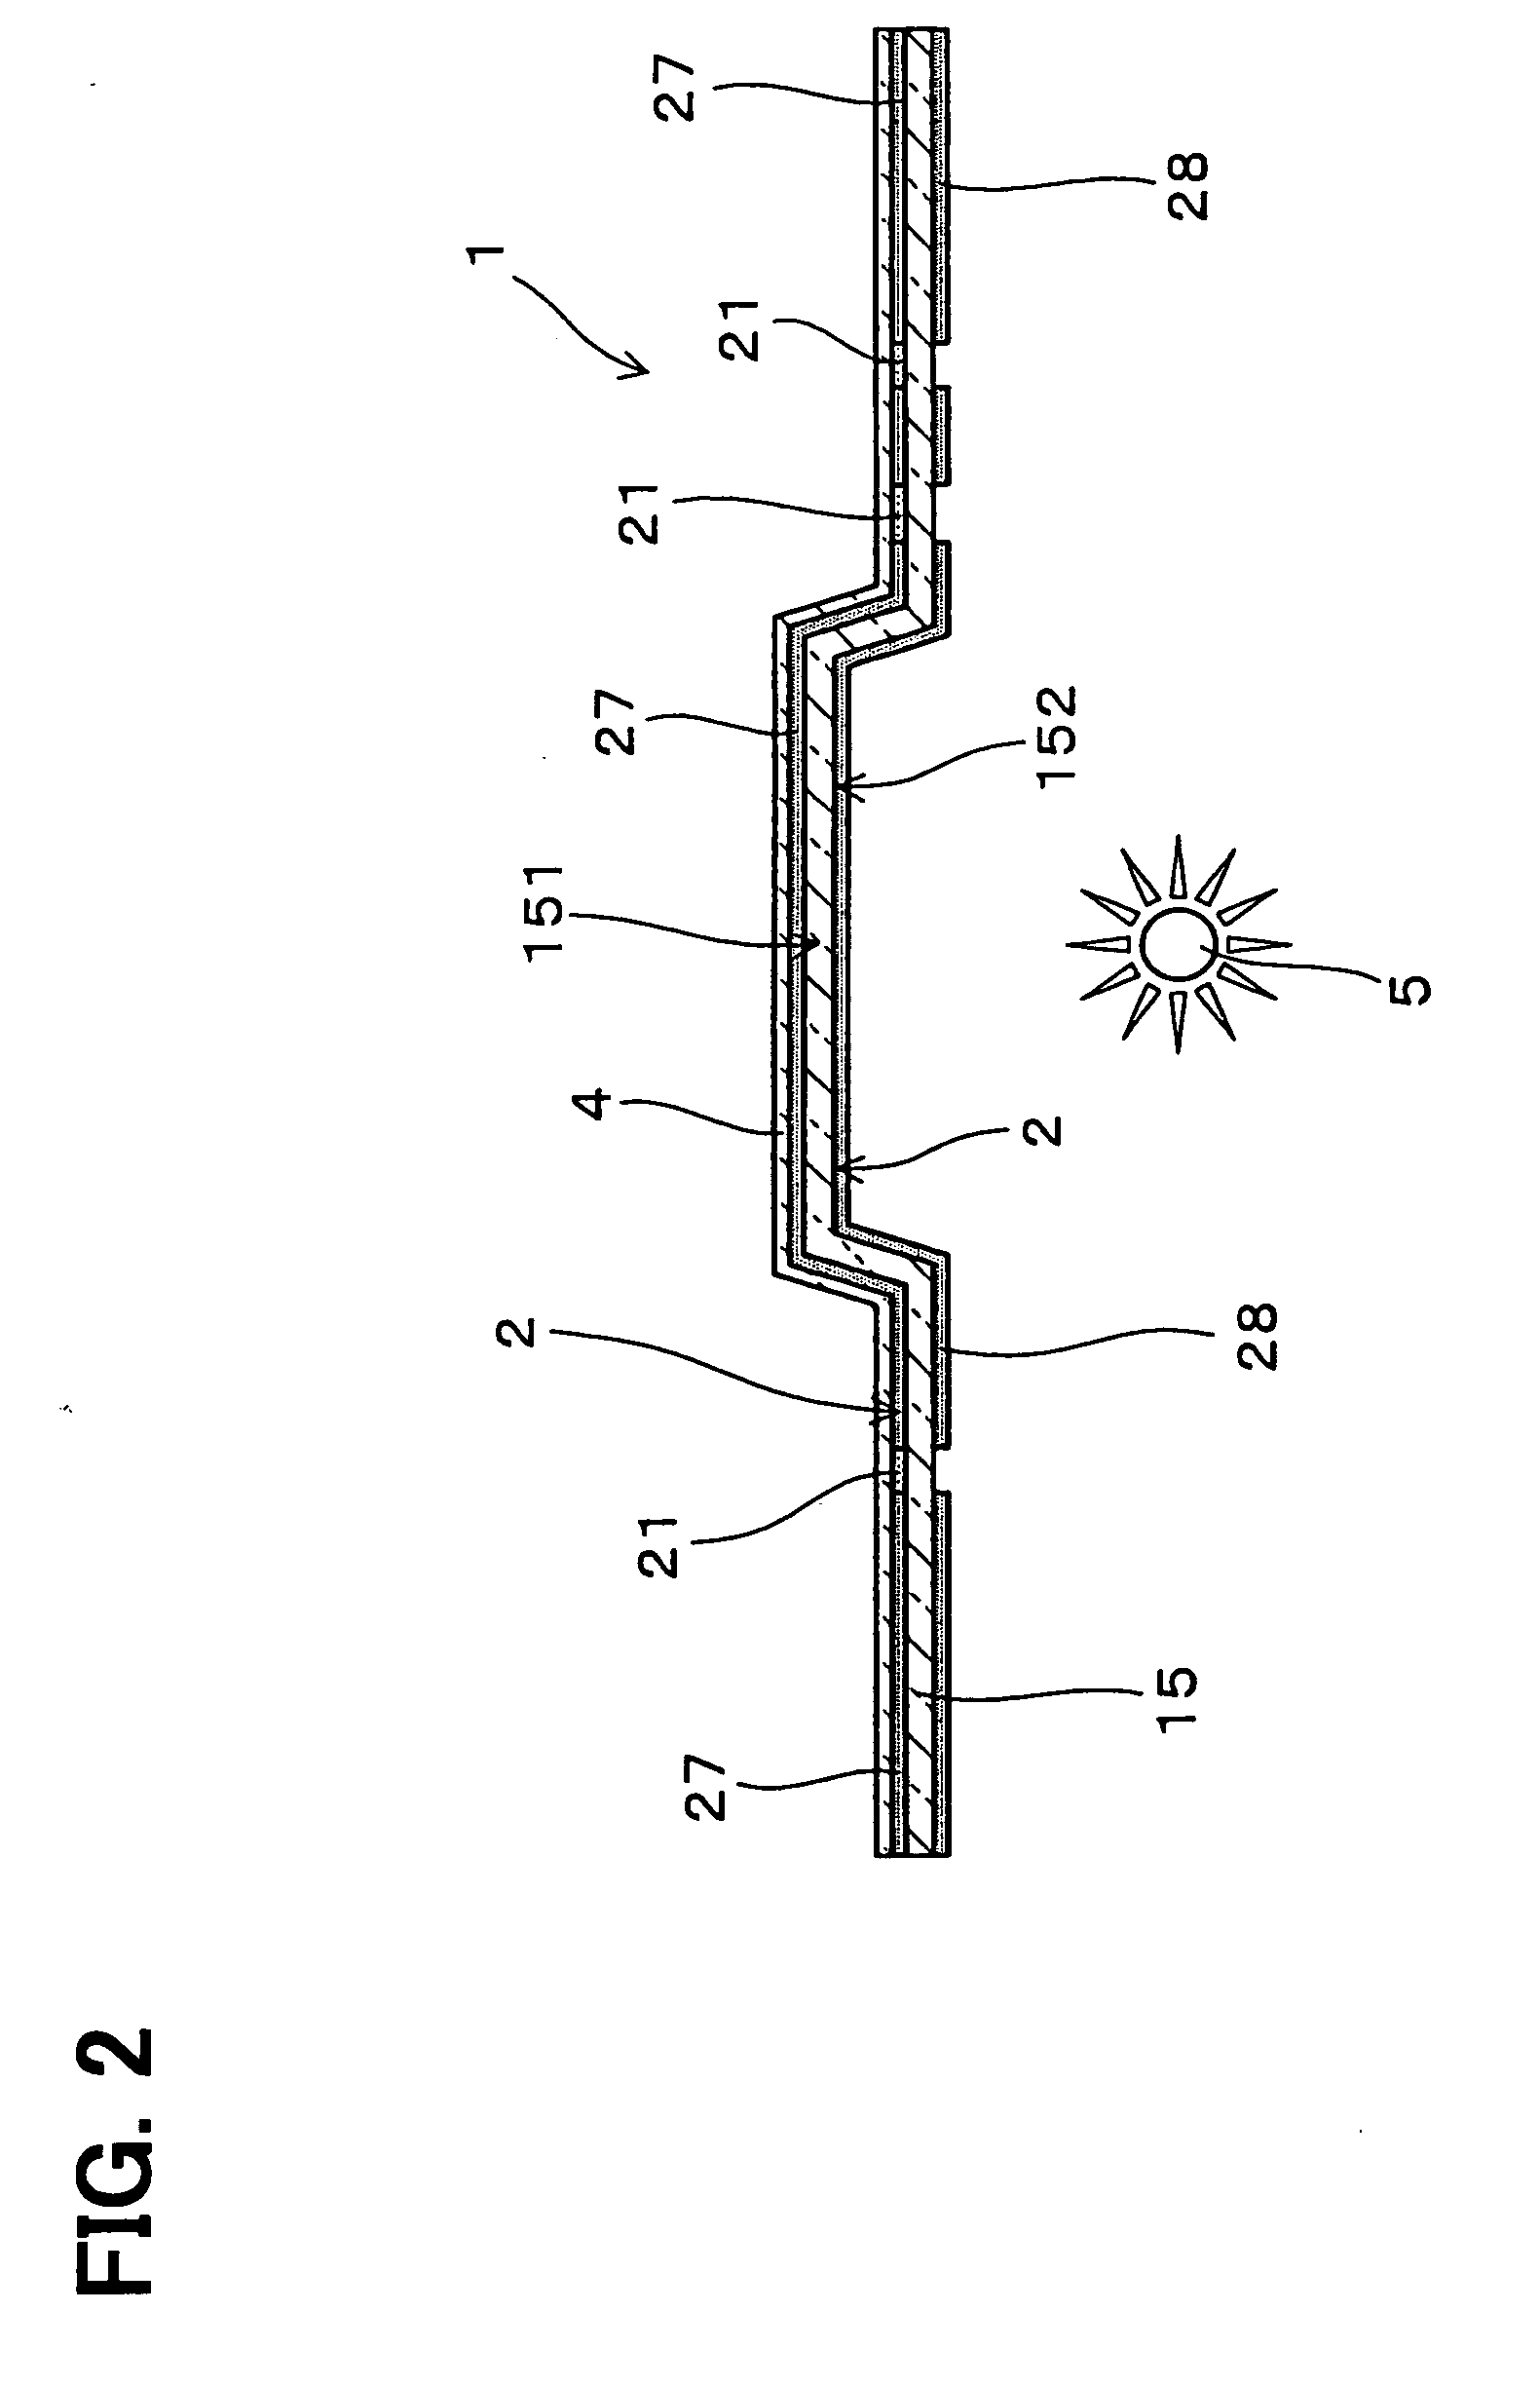 Indicator panel and method of manufacturing the same